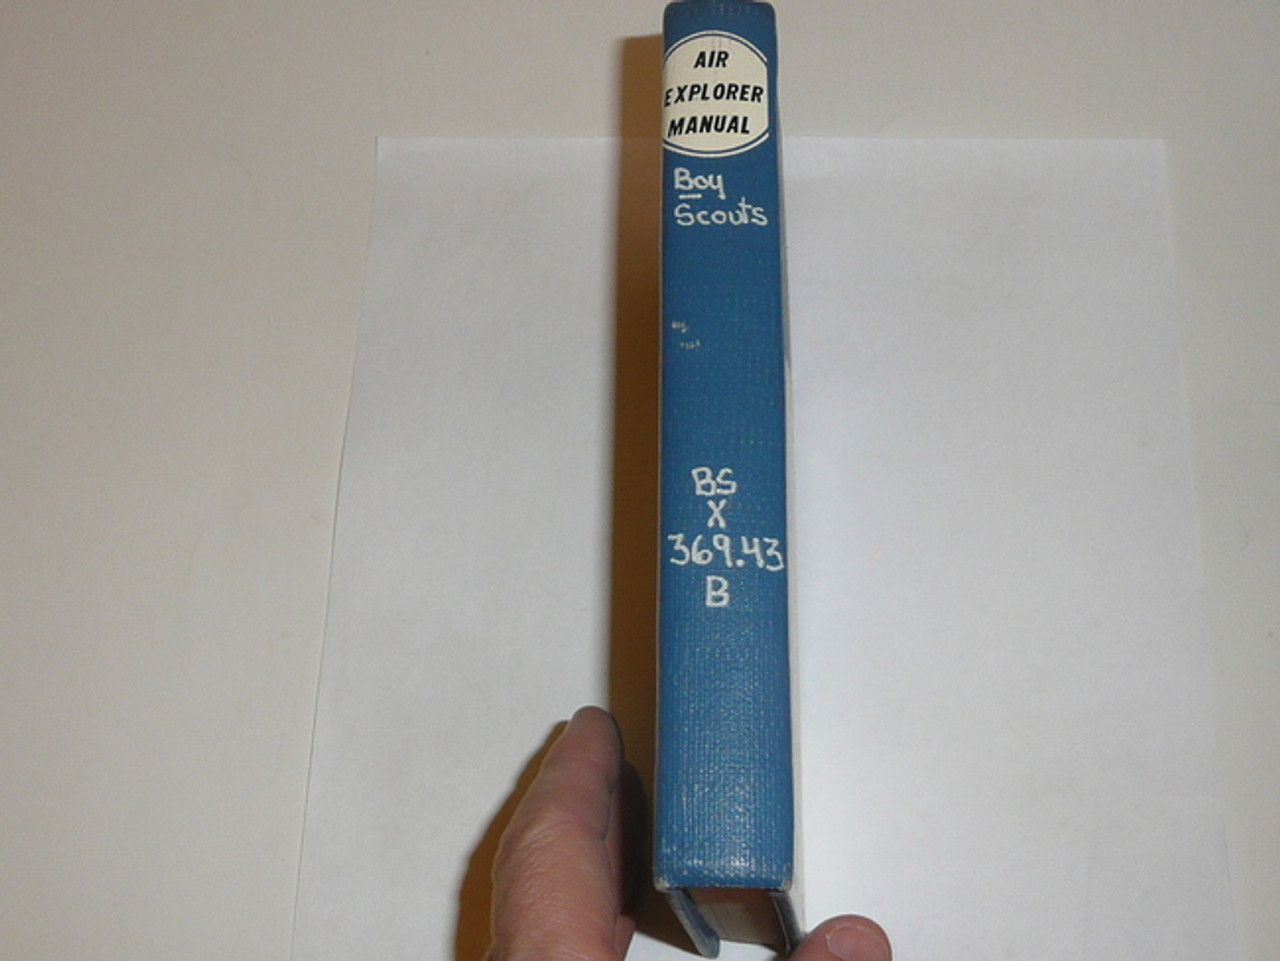 1958 Air Explorer Manual. Air Scout, Second Edition, May 1958 Printing, RARE Official Library Bound Printing